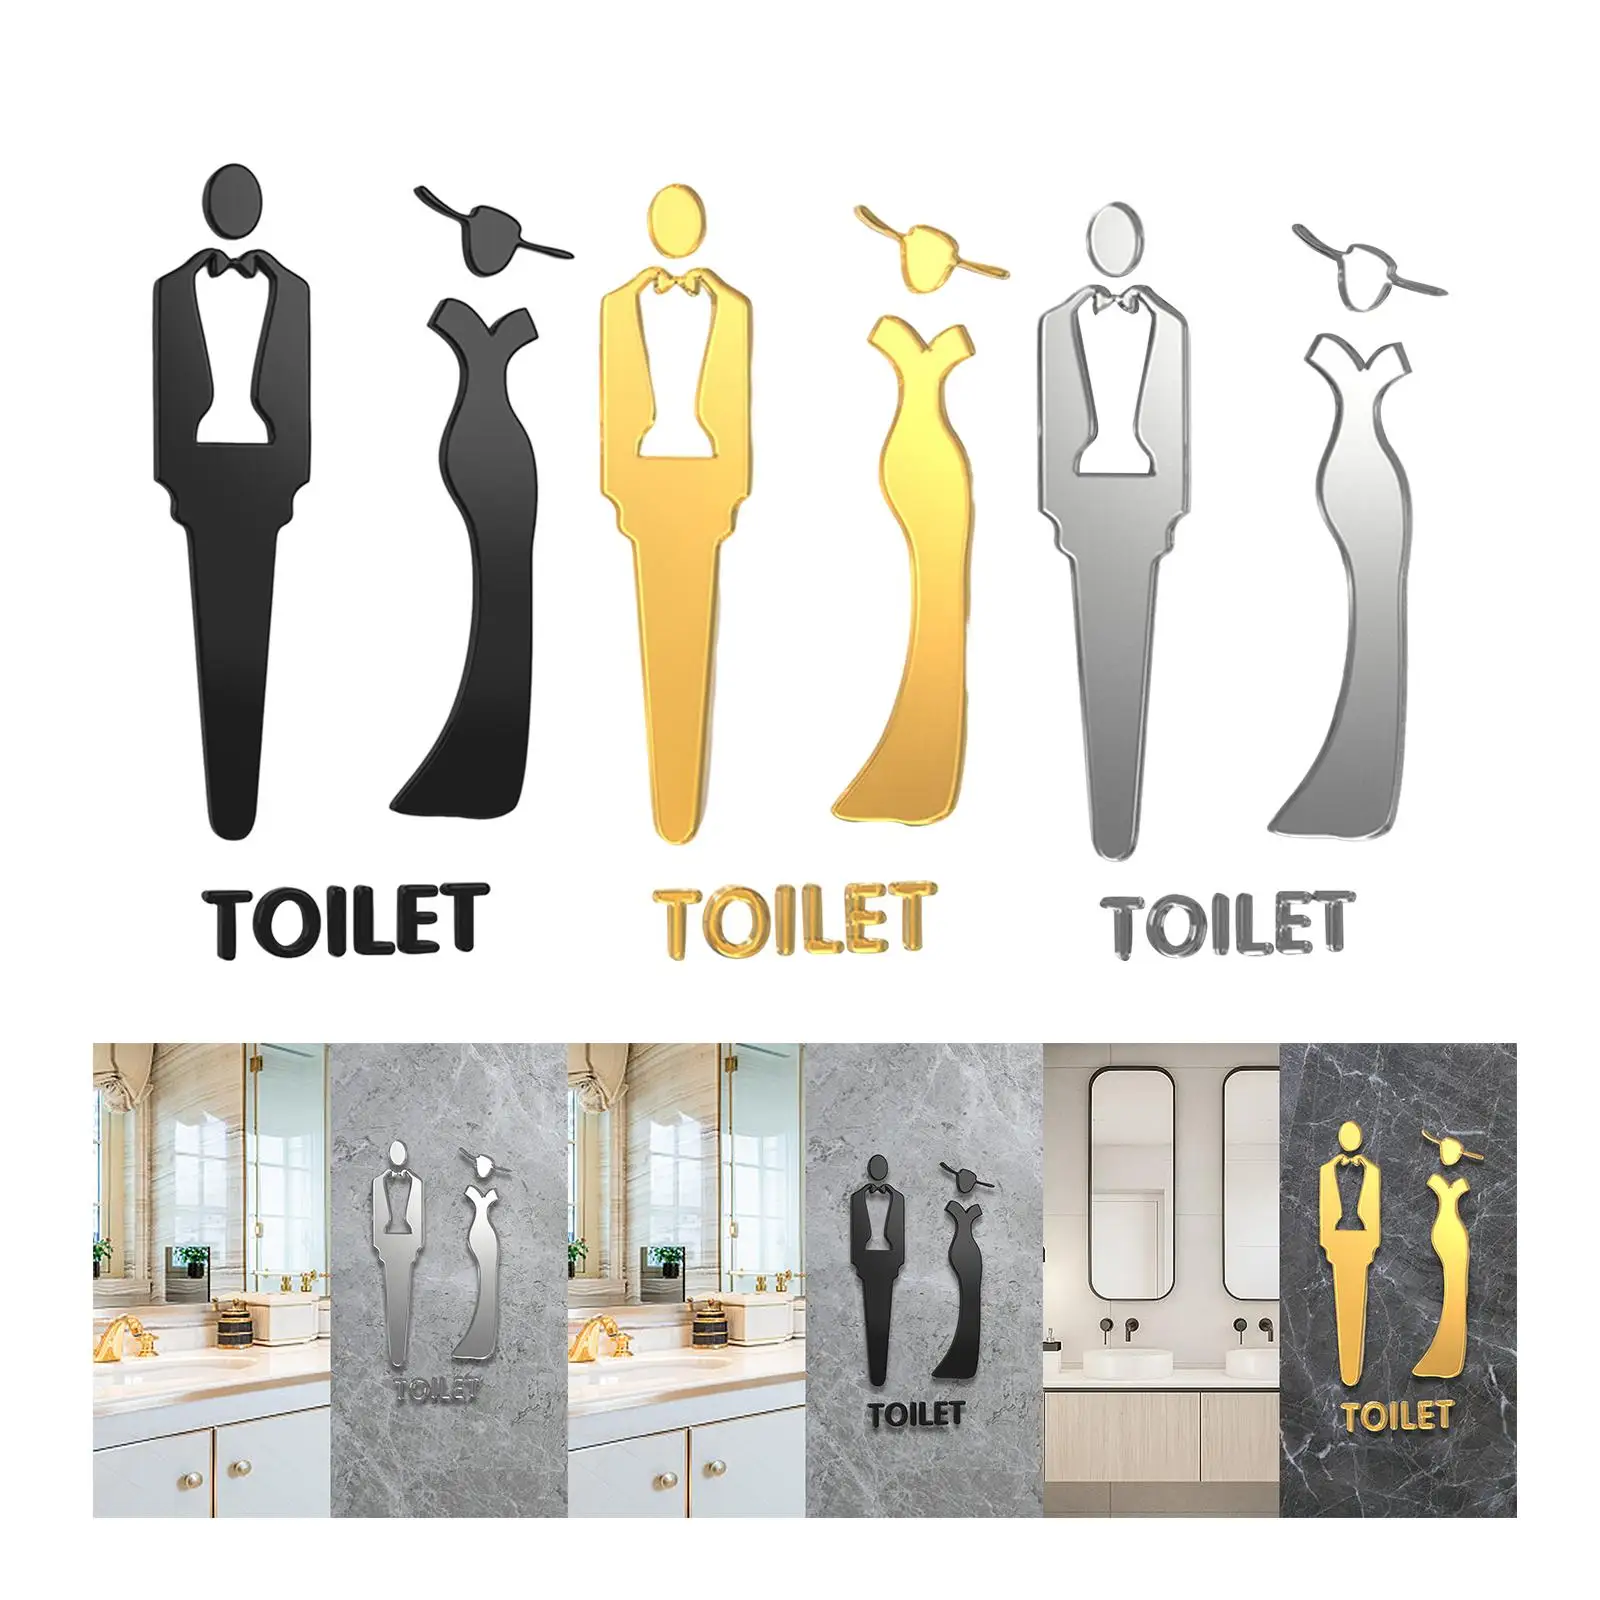 Male and Female Bathroom Door Signage Unisex Acrylic Symbols for Commercial